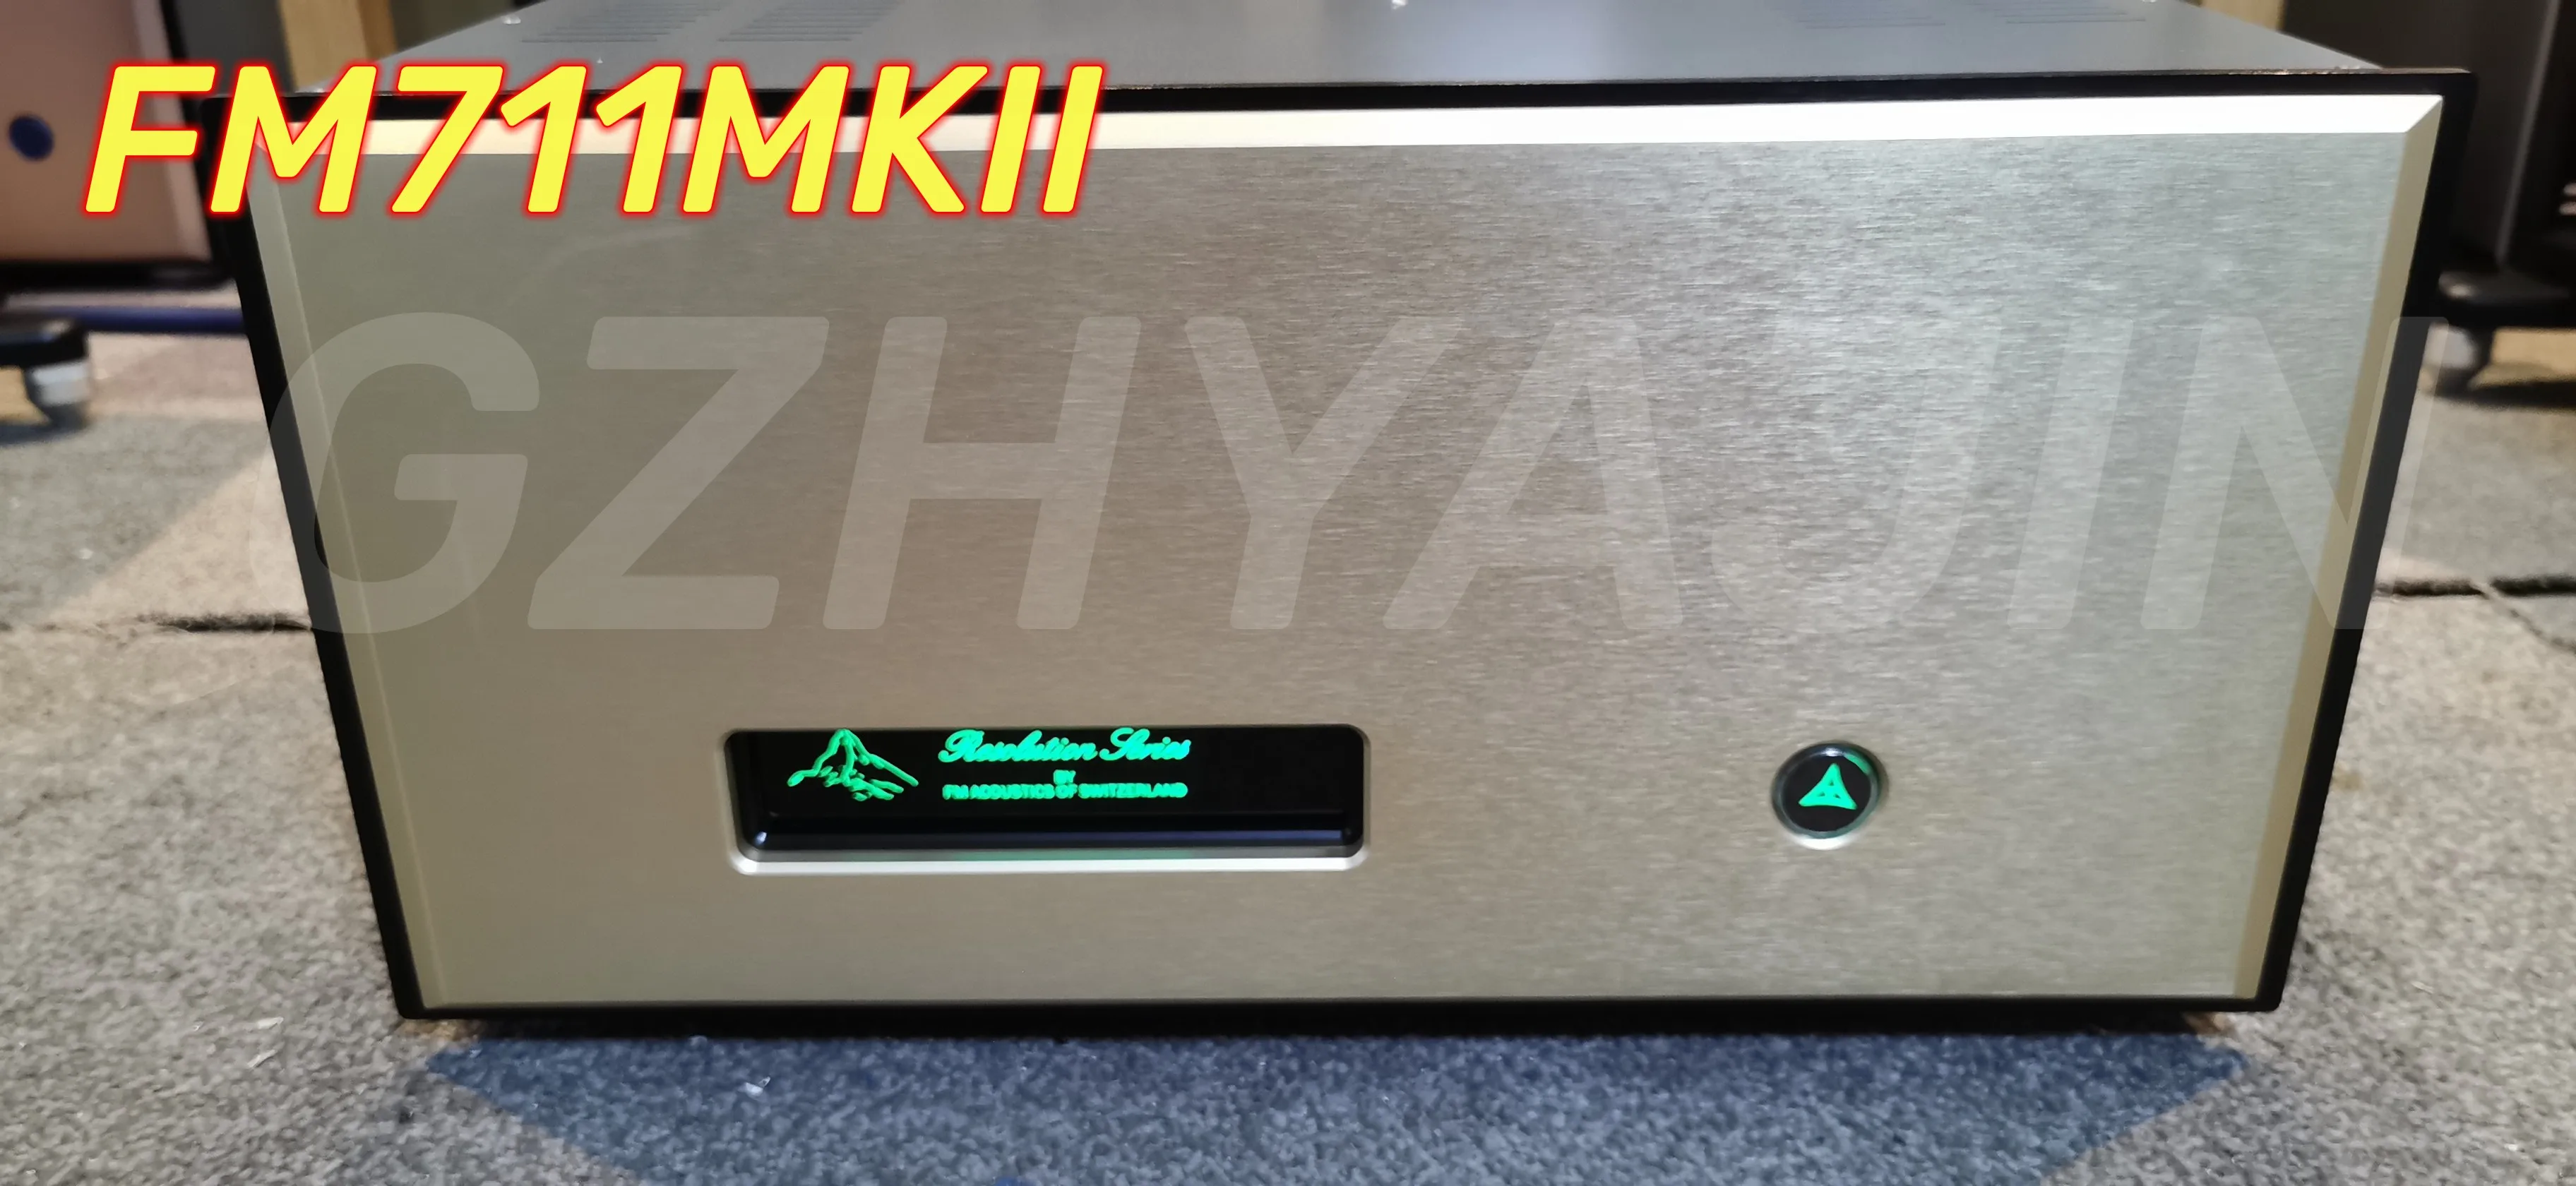 

Refer to HI-END FM Acoustics 711MKII fever level power amplifier after balance XLR RCA input 260W*2 8Ω, 500W*2 4Ω, 800W*2 2Ω